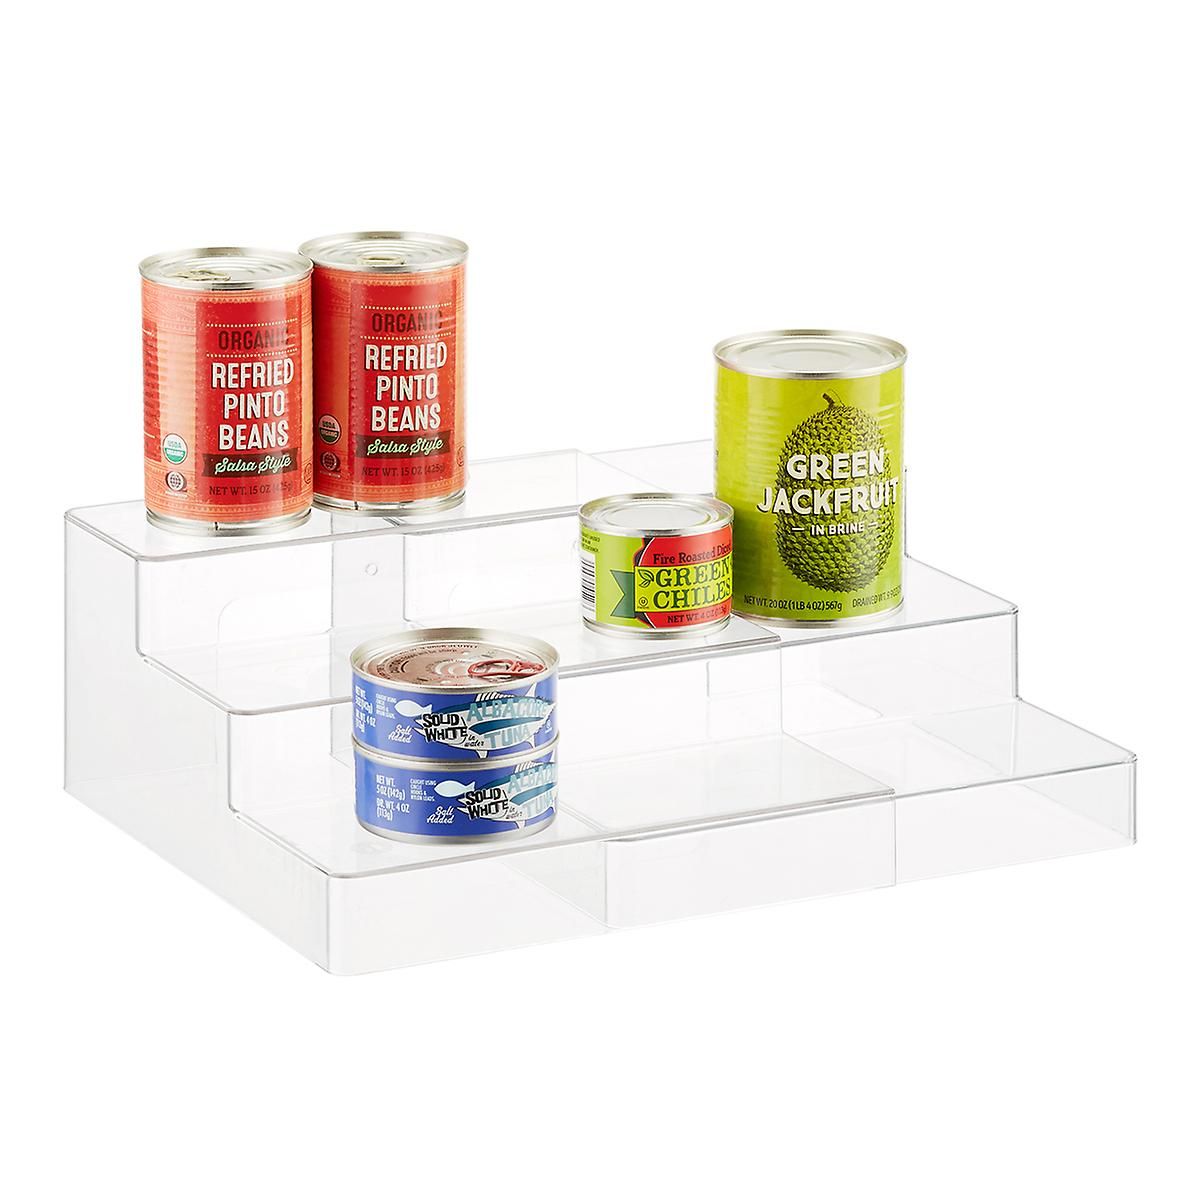 The Home Edit by iDesign 3-Tier Shelf | The Container Store